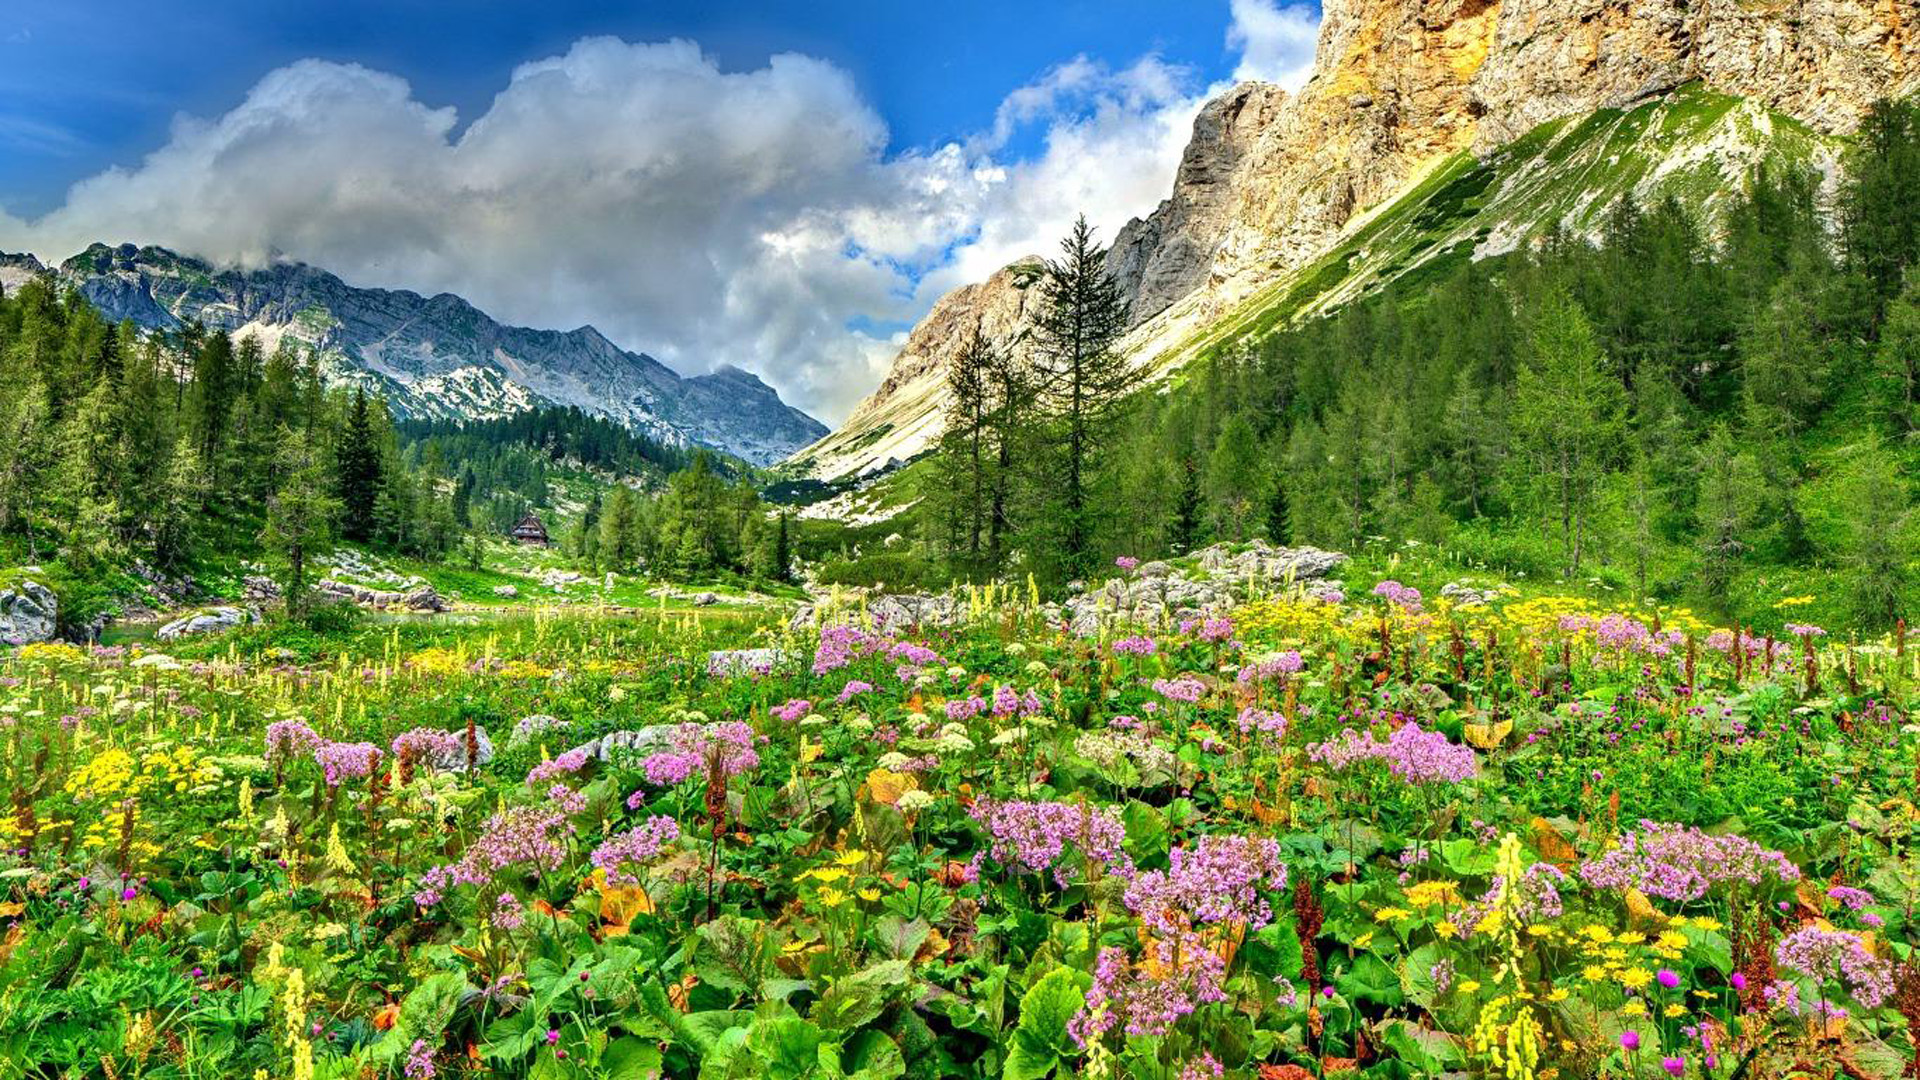 Landscape-nature-spring-flowers-and-mountains-rocky-mountain-peaks-blue-skies-and-white-clouds-Desktop-Wallpaper-full-screen.jpg